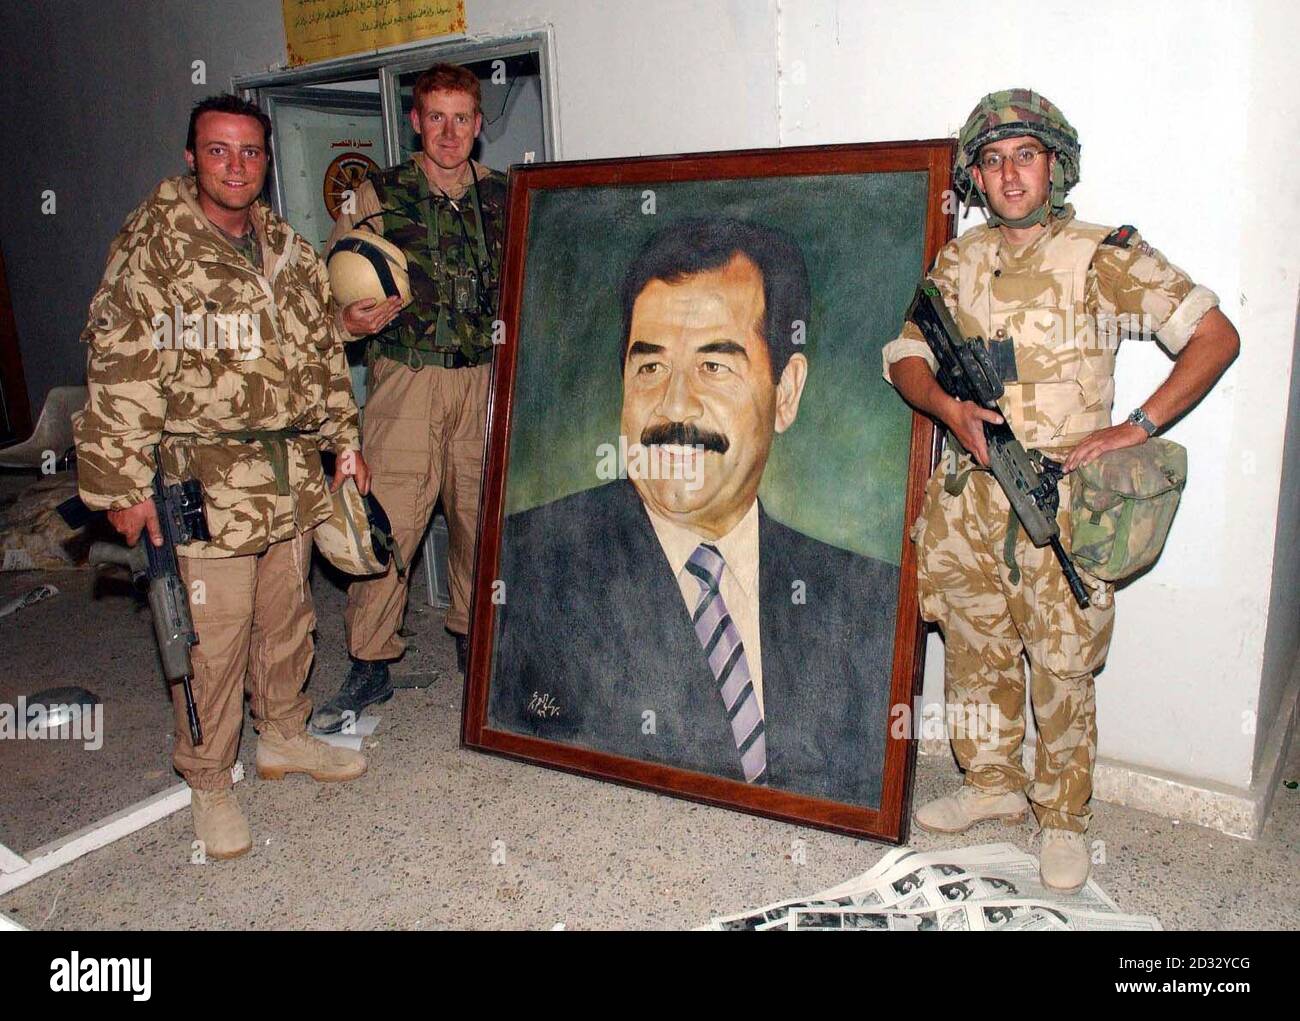 (L-R) Capt Joe Power, Maj Andrew Britton and Capt Simon Ridgway stand near the picture of Saddam in the foyer at the Ba-ath party headquarters at Basra as Cyclops squadron from the 2nd Royal Tank Regiment take the town in southern Iraq. Stock Photo